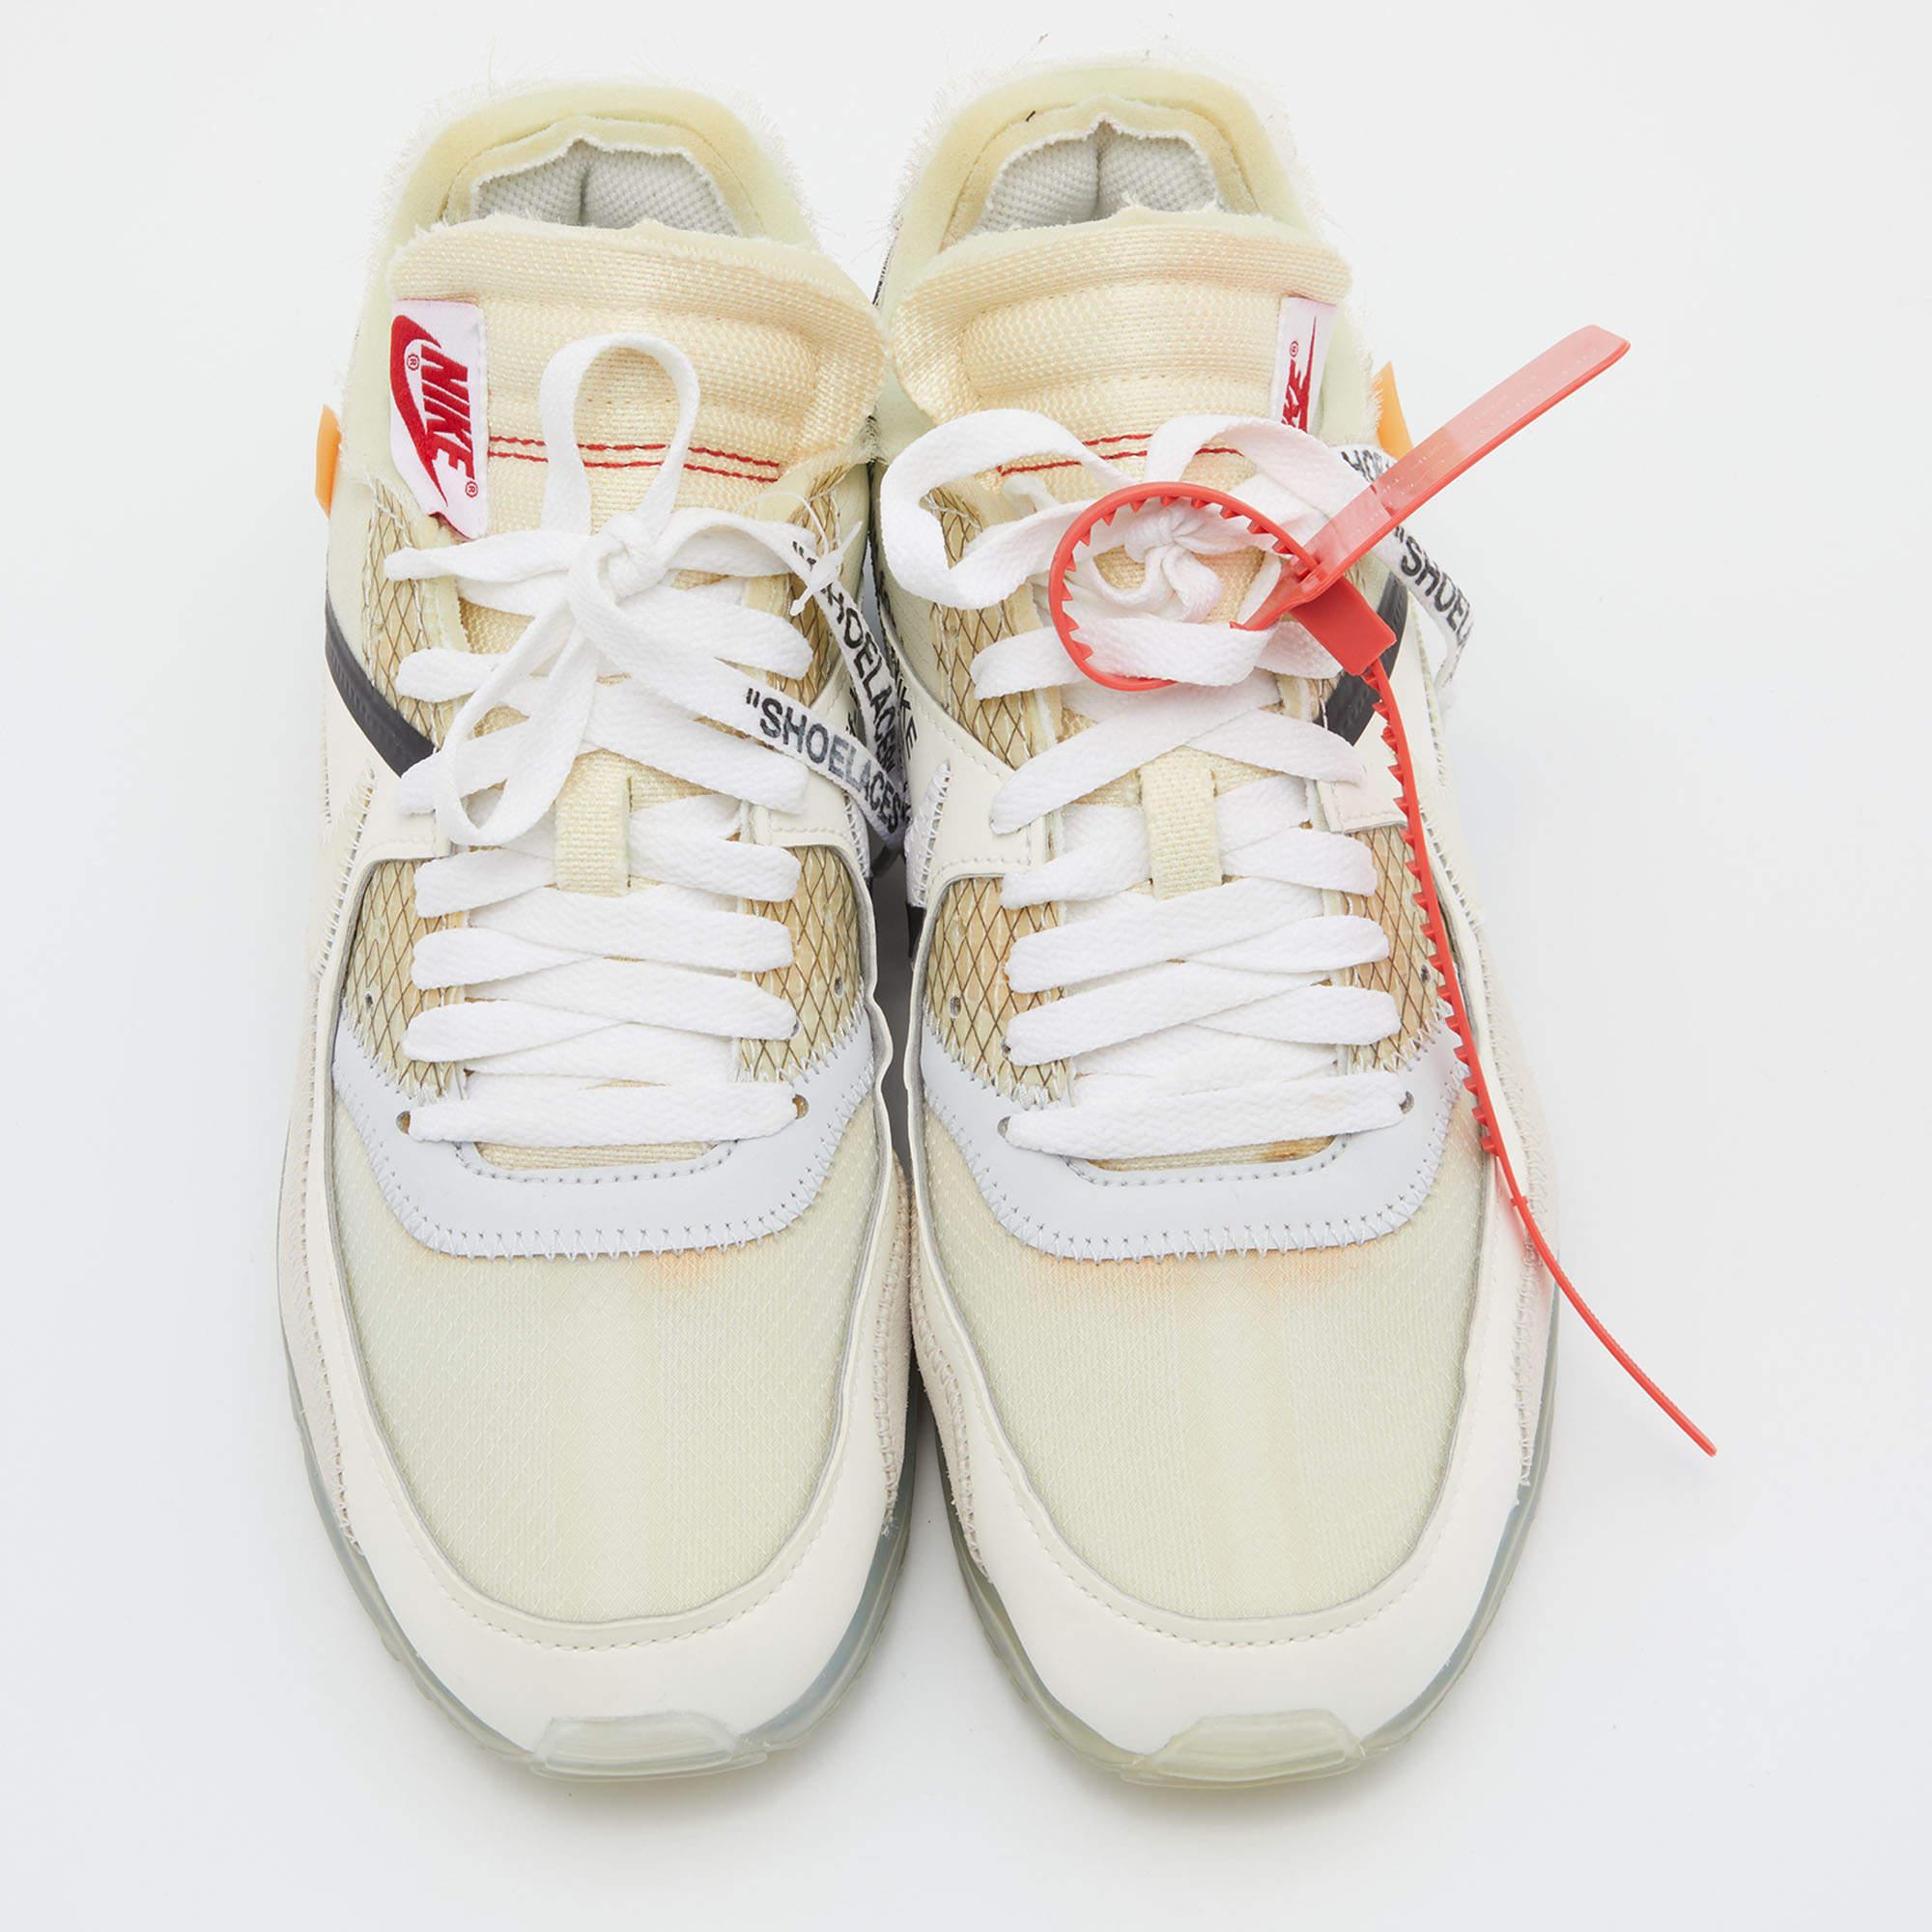 These Off-White x Nike sneakers will add a blast of high fashion to your casual outfit. They feature a white leather and suede body. The low-top pair is completed with lace-ups and tough rubber soles for a comfortable fit.

